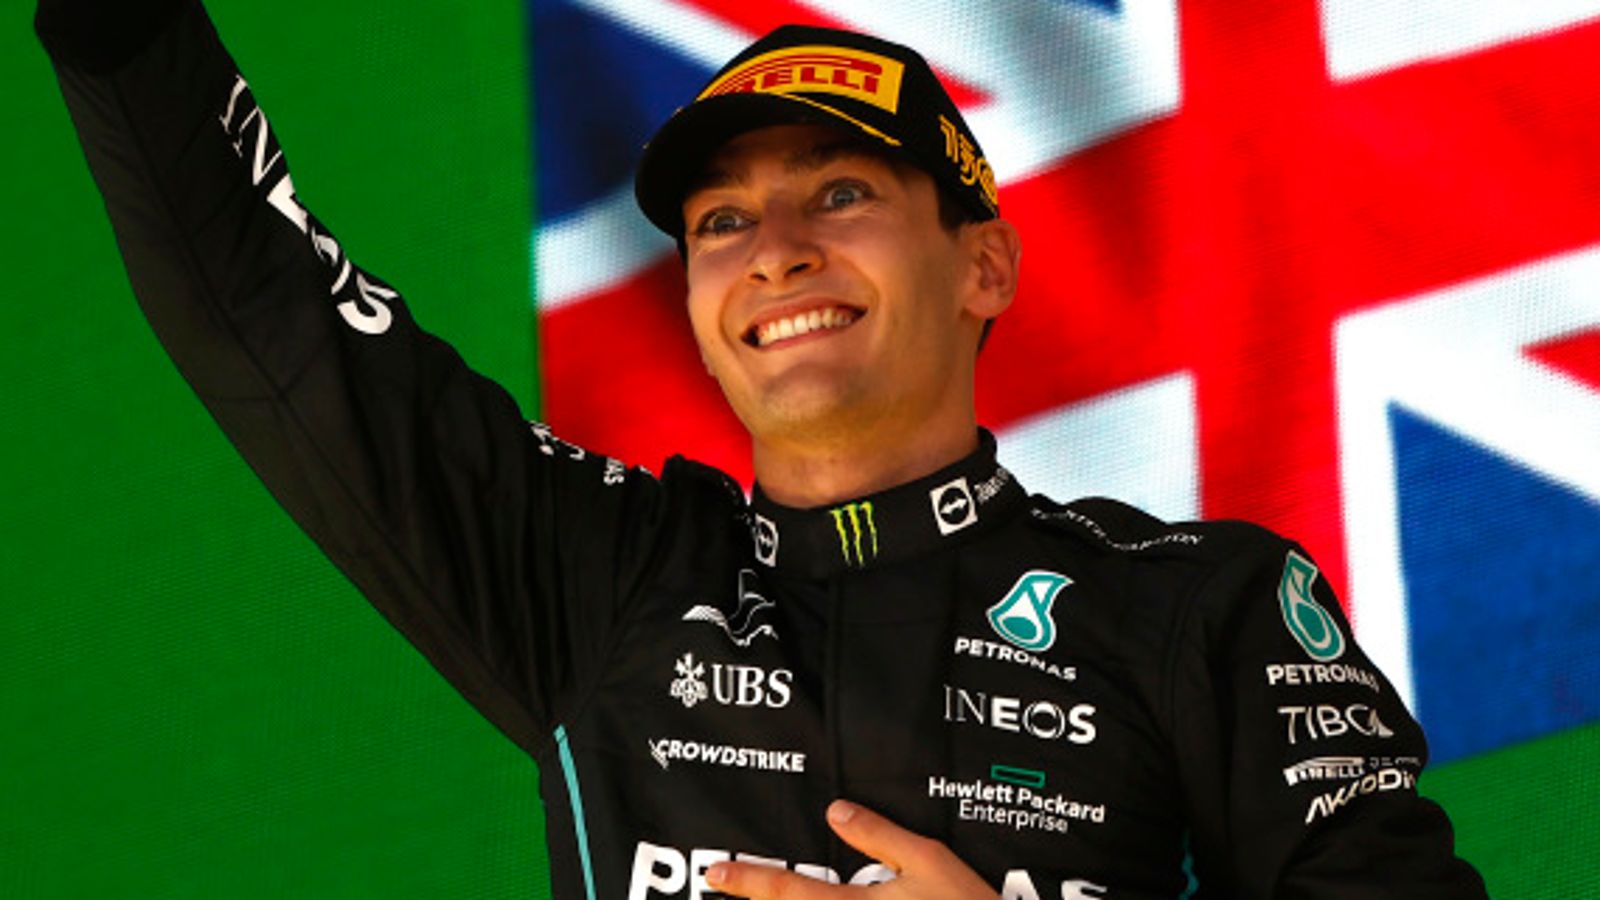 Sao Paulo GP Russell claims first F1 Grand Prix win as Lewis